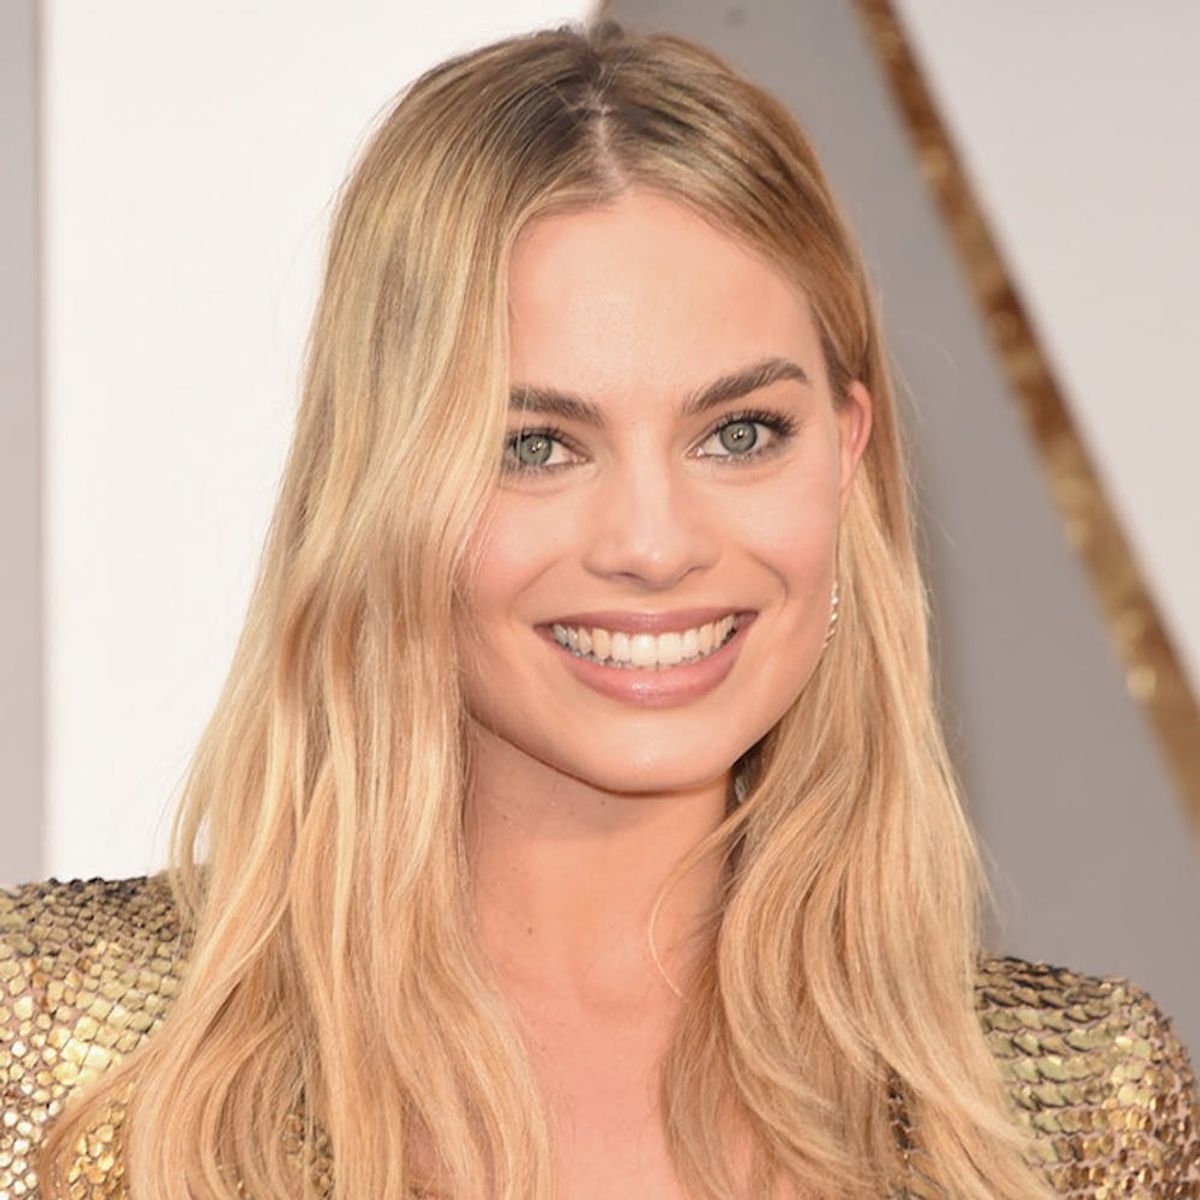 Morning Buzz! Margot Robbie’s Hilarious Diamond Ring Reveal Just Pretty Much Confirmed Her Marriage + More